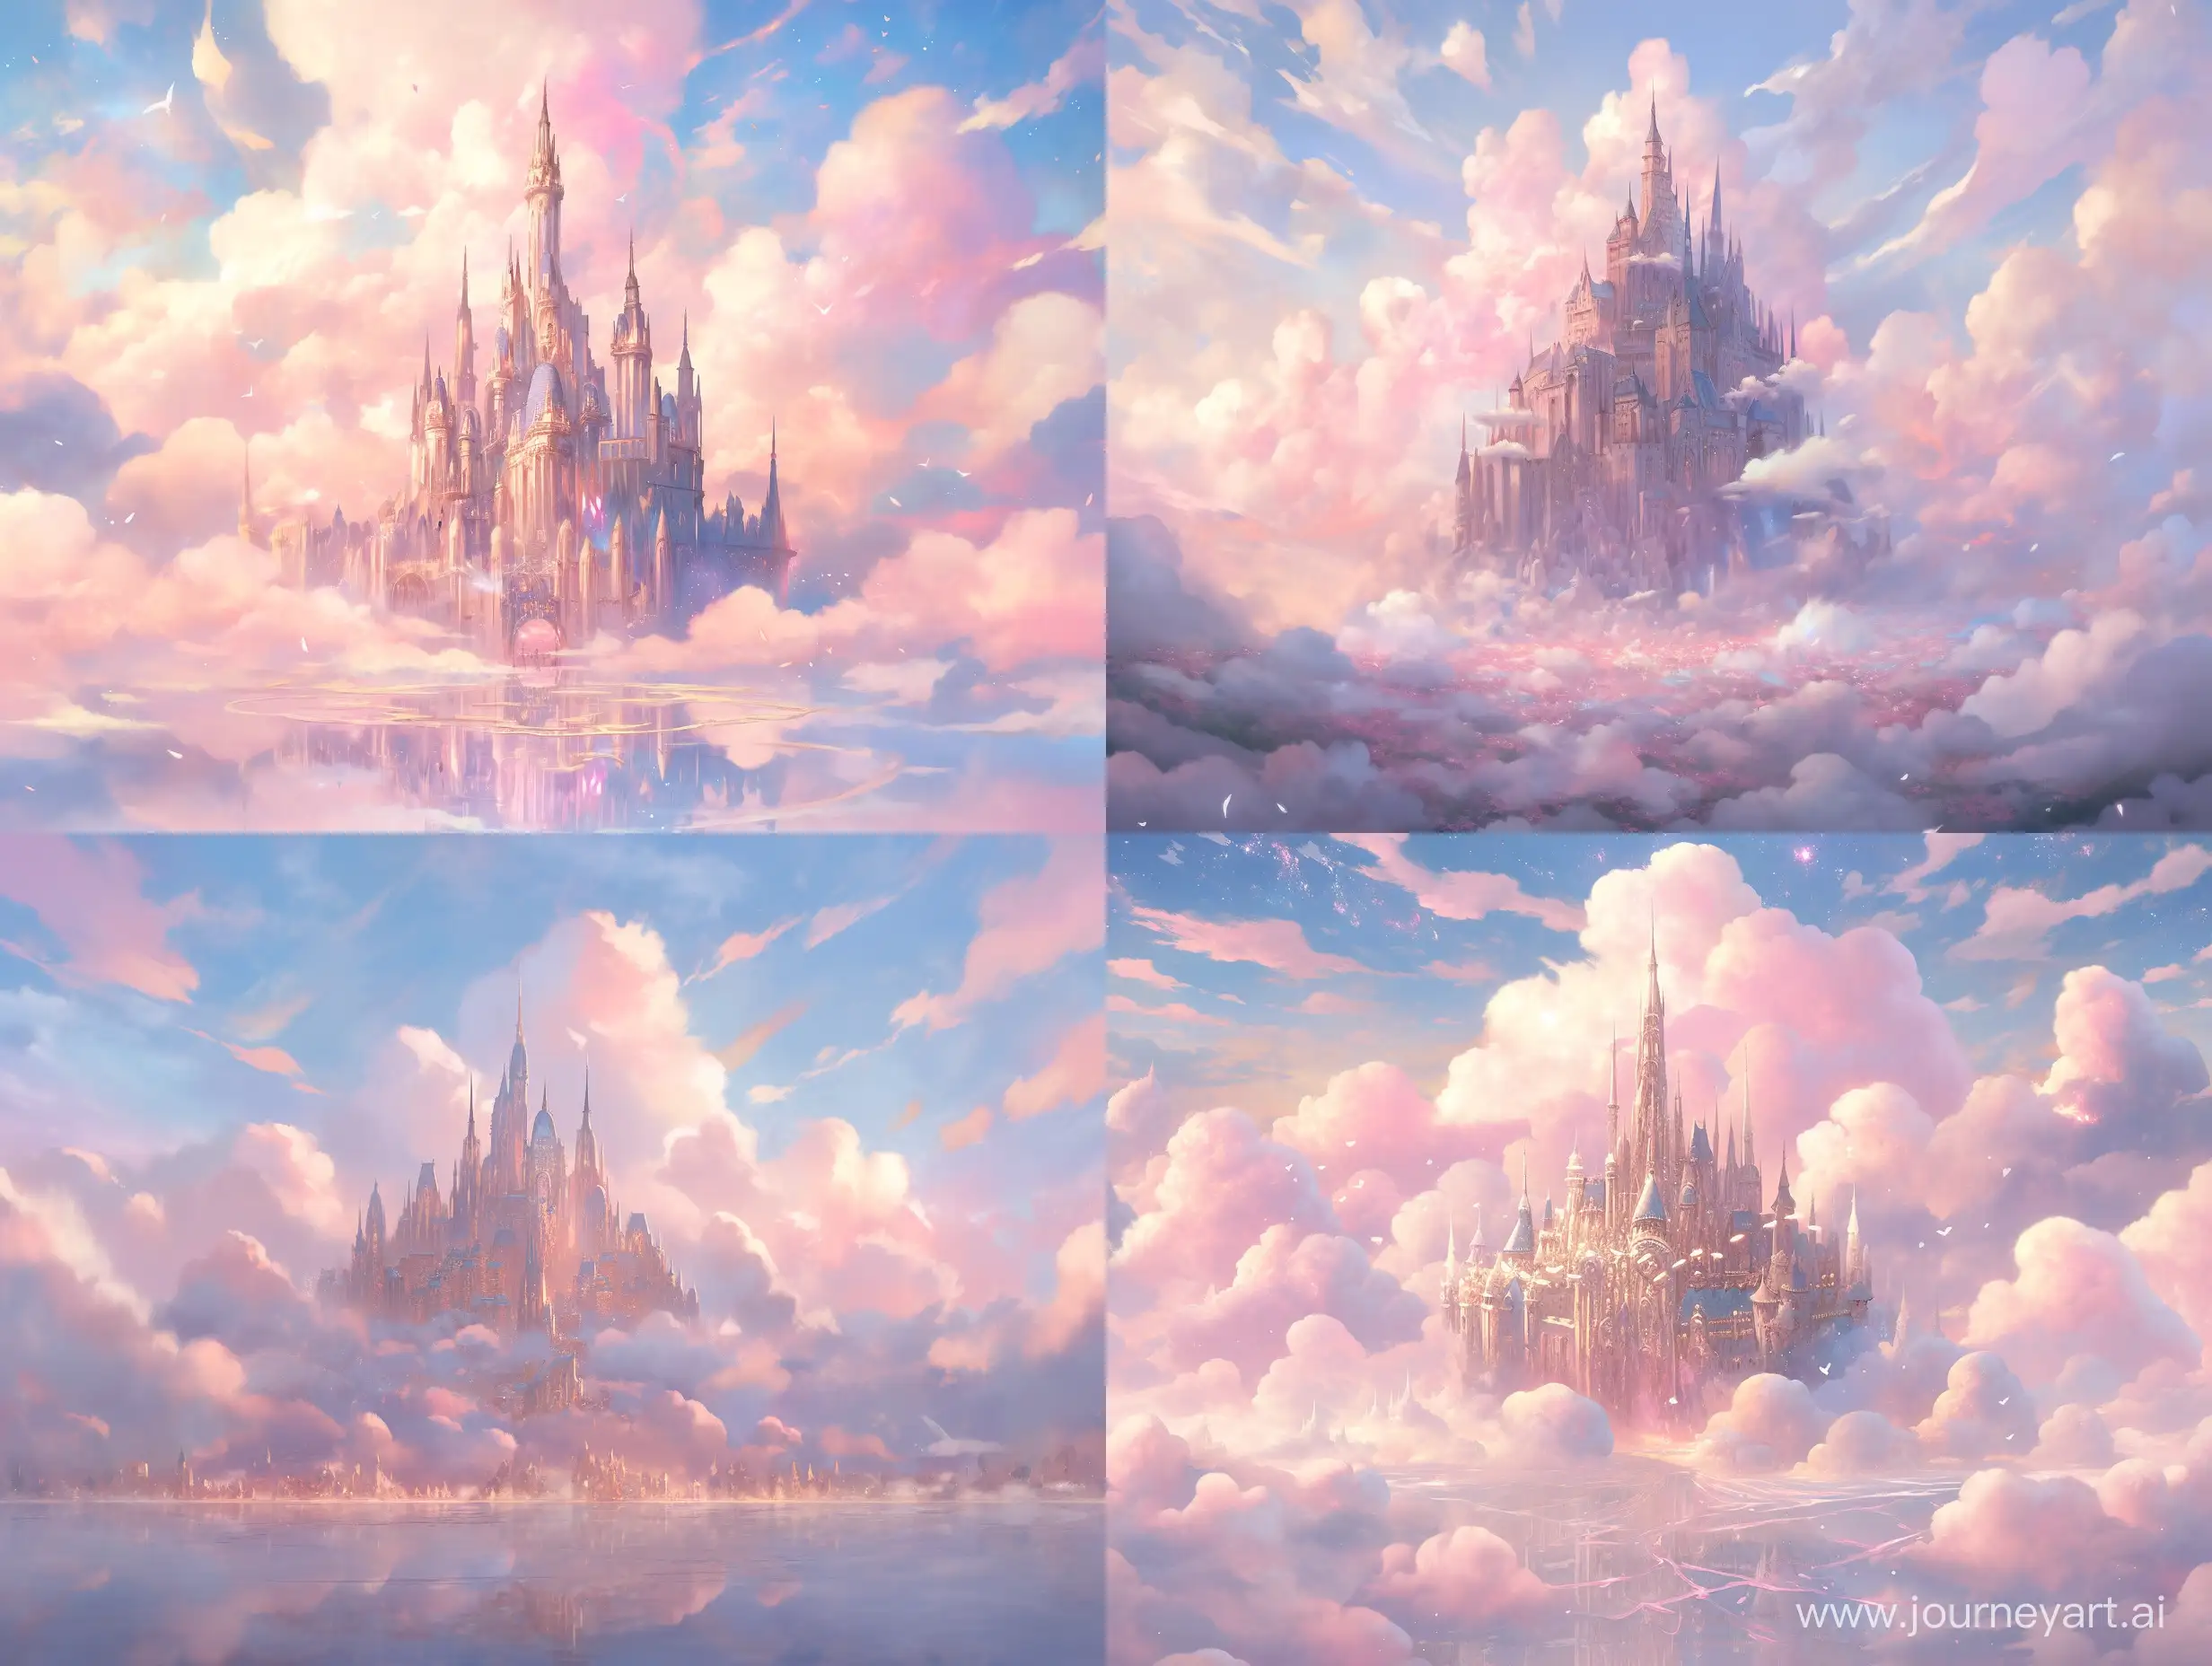 The picture features a soft and gentle style, with a light blue and light pink sky as the background. The sky is filled with clouds, creating a dreamy and serene atmosphere. The clouds are scattered throughout the sky, adding depth and dimension to the scene. 

In addition to the sky and clouds, there is a castle visible in the picture, which adds a touch of fantasy and intrigue to the scene. The castle is surrounded by a large, fluffy cloud, further enhancing the sense of wonder and magic in the image. Overall, the picture is a beautiful and captivating representation of a peaceful and enchanting landscape. --ar 4:3 --niji